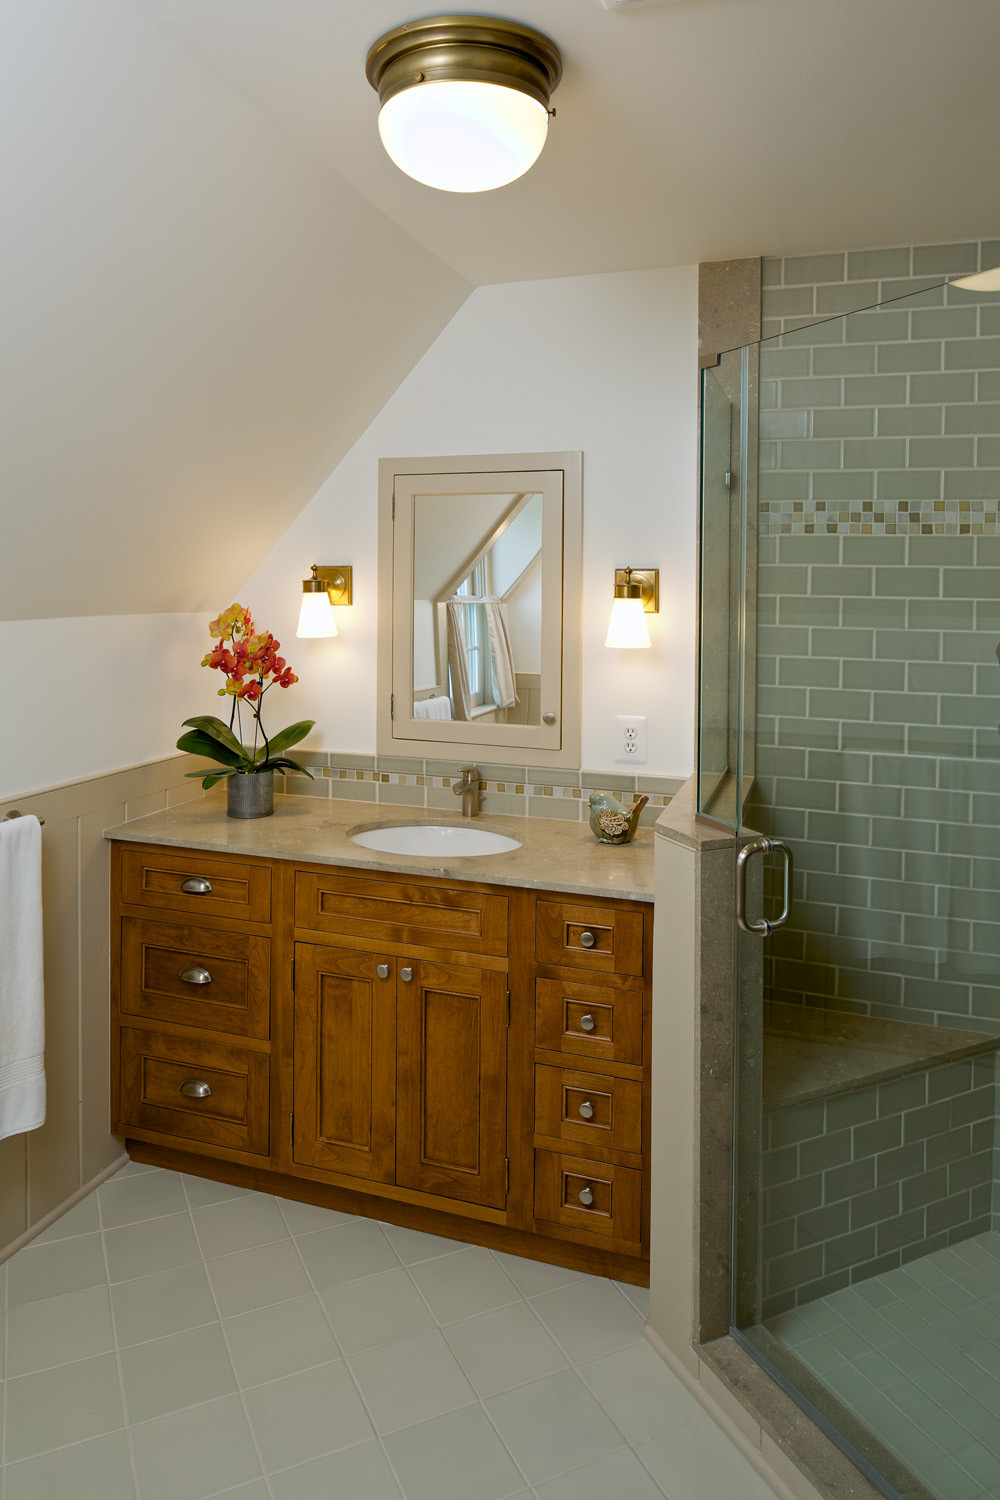 Bathrooms With Stained Wood